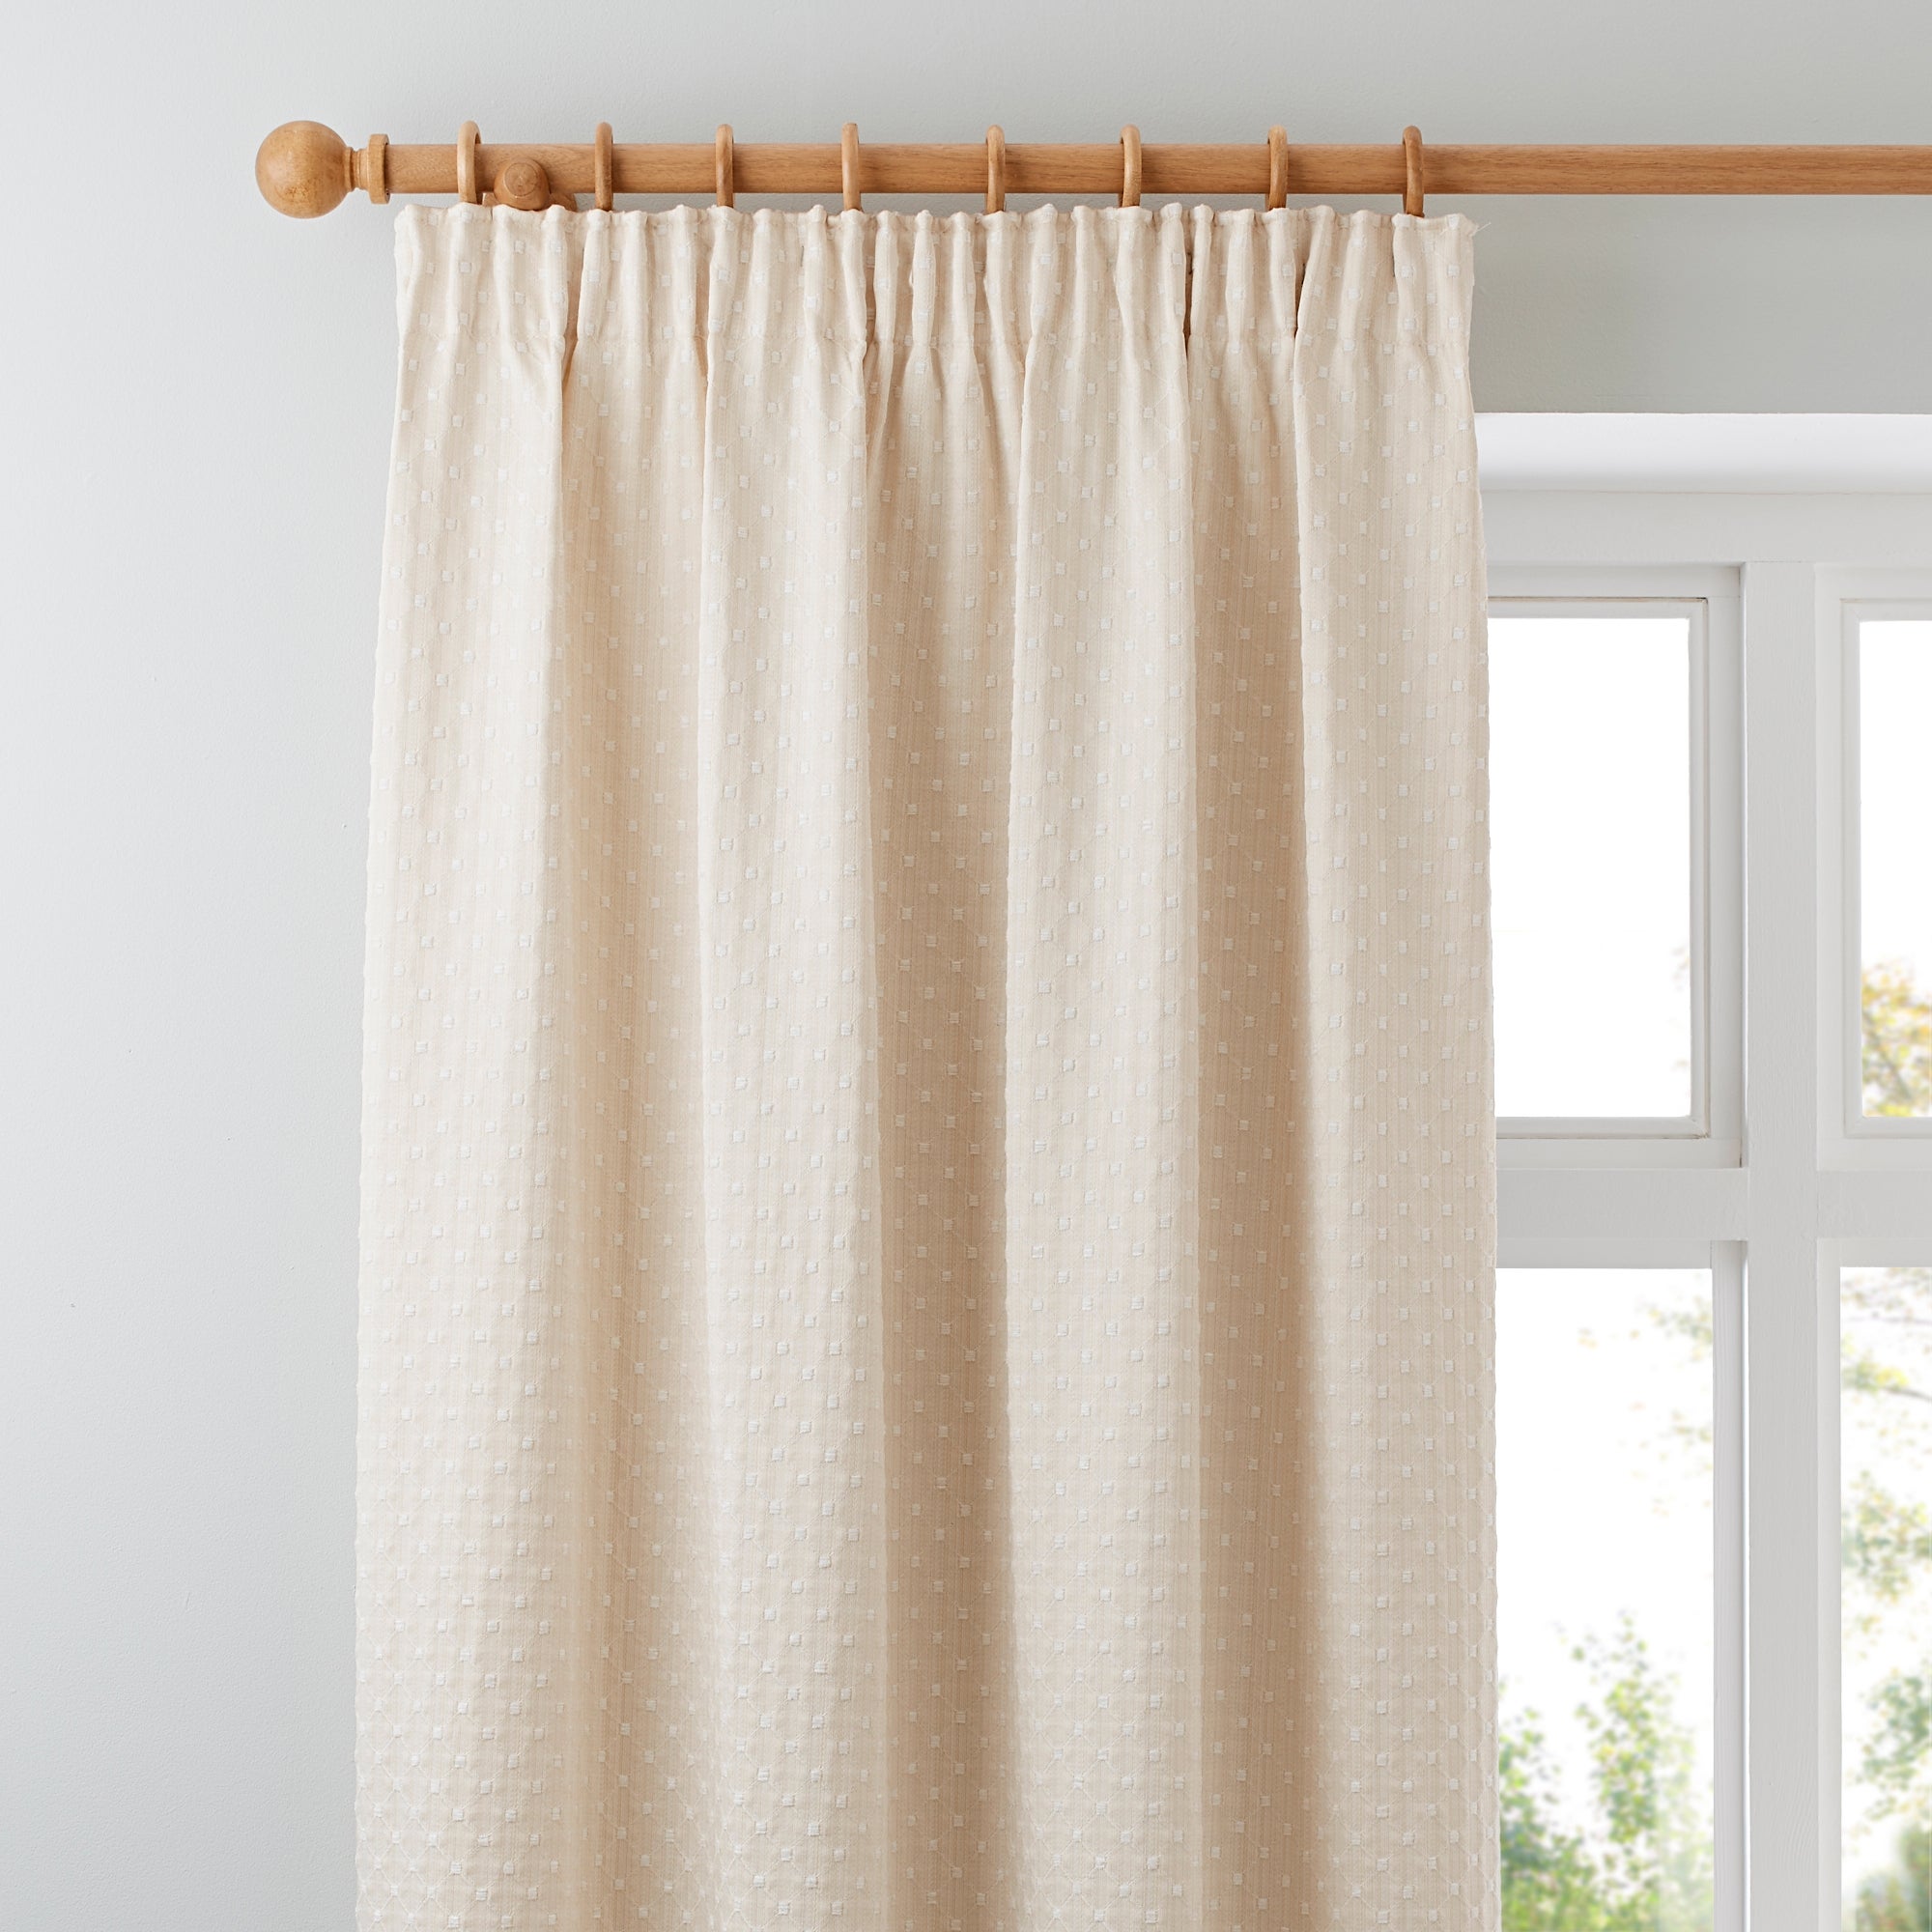 All Ready Made Curtains | Dunelm | Page 5